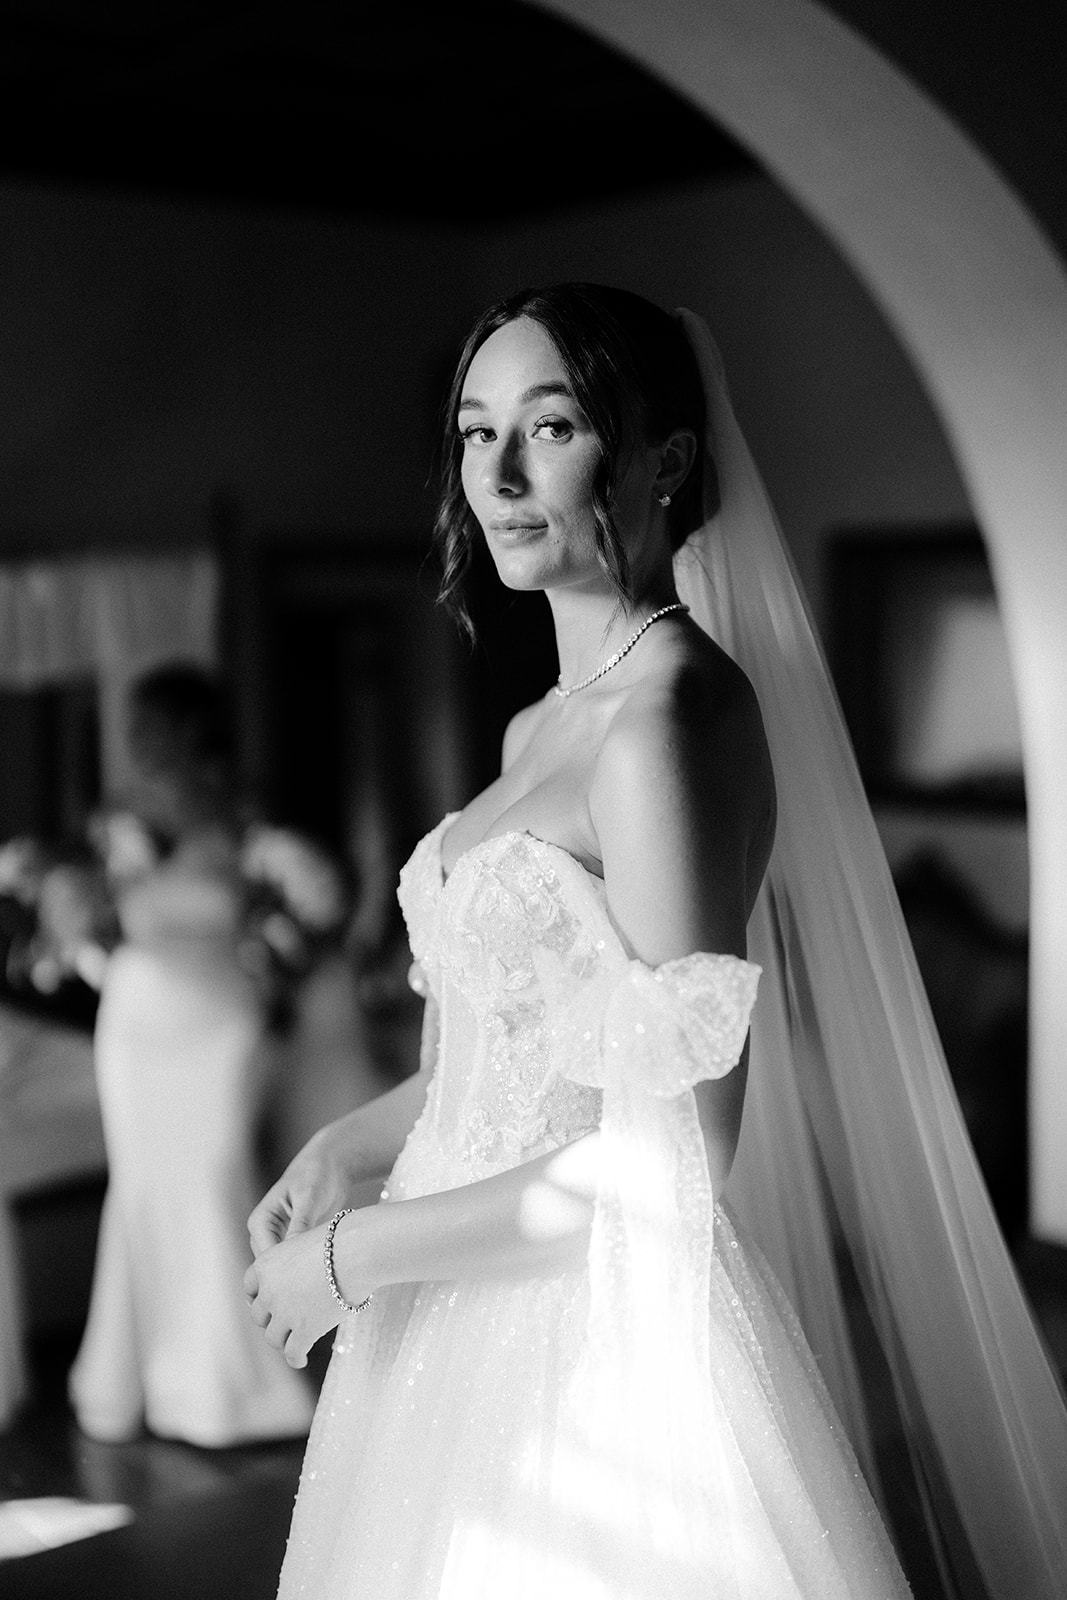 The bride poses in her Maggie Sottero gown